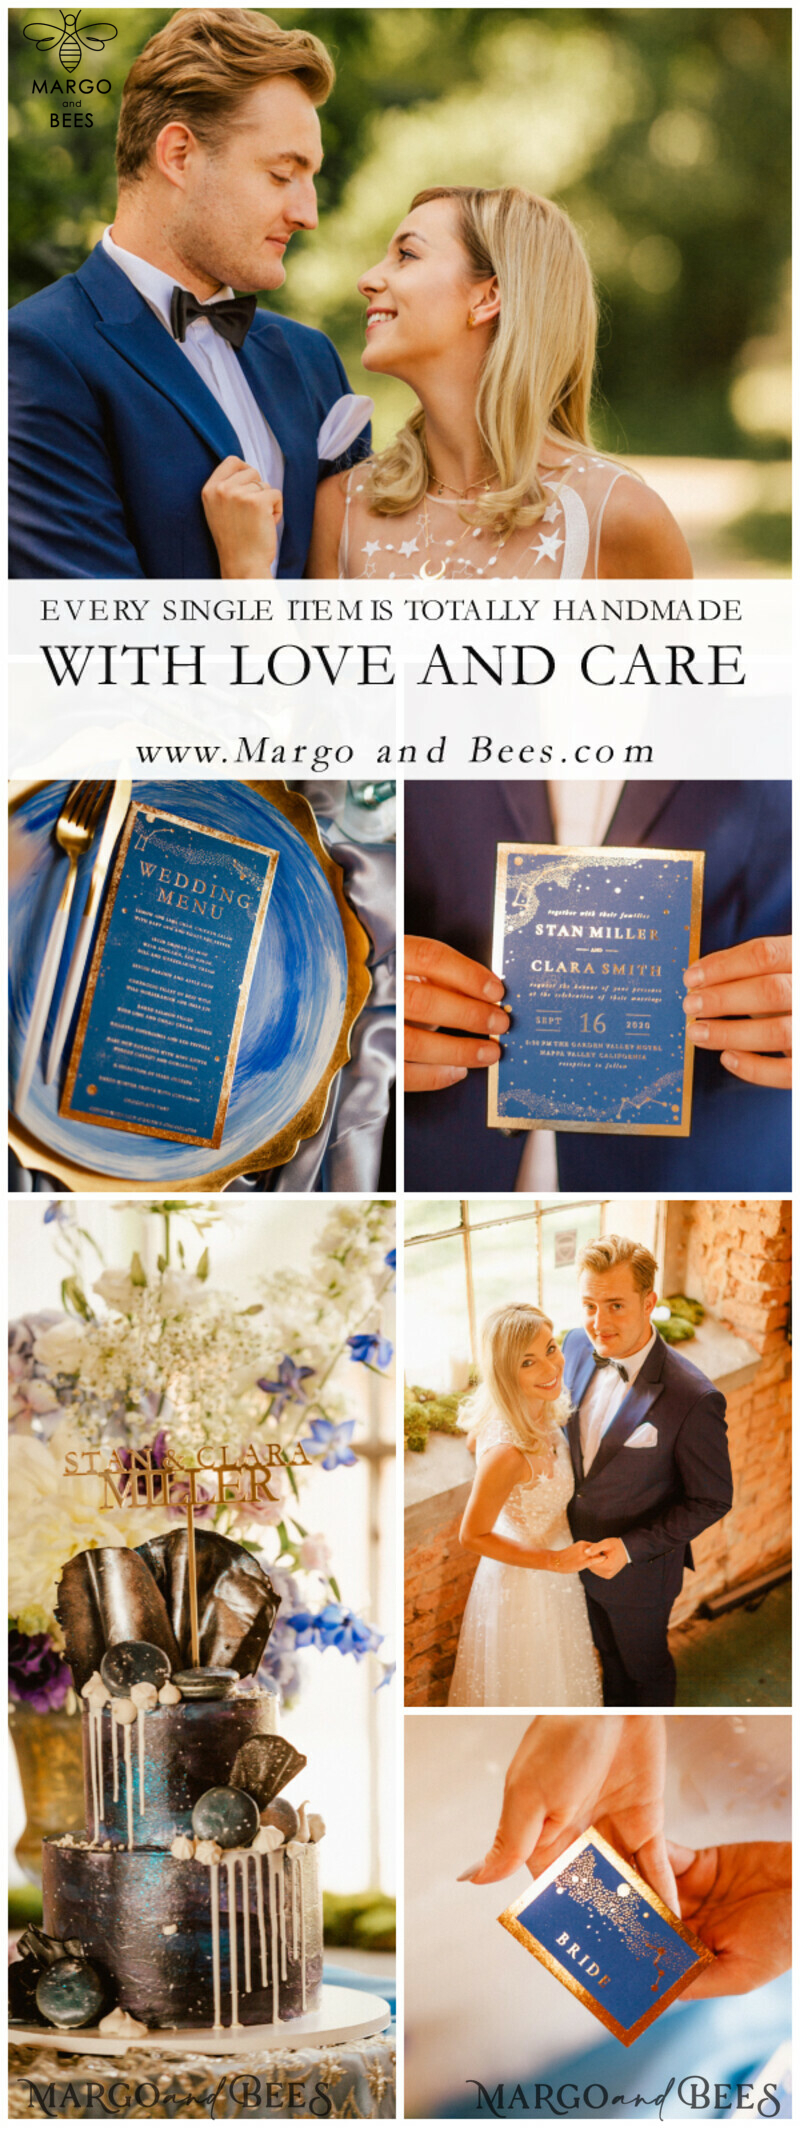 Introducing the Glamour and Elegance of Luxury Golden Shine Wedding Invitations: A Bespoke Galaxy Wedding Invitation Suite with Royal Navy Blue Wedding Invites and Exquisite Gold Foil Details-10